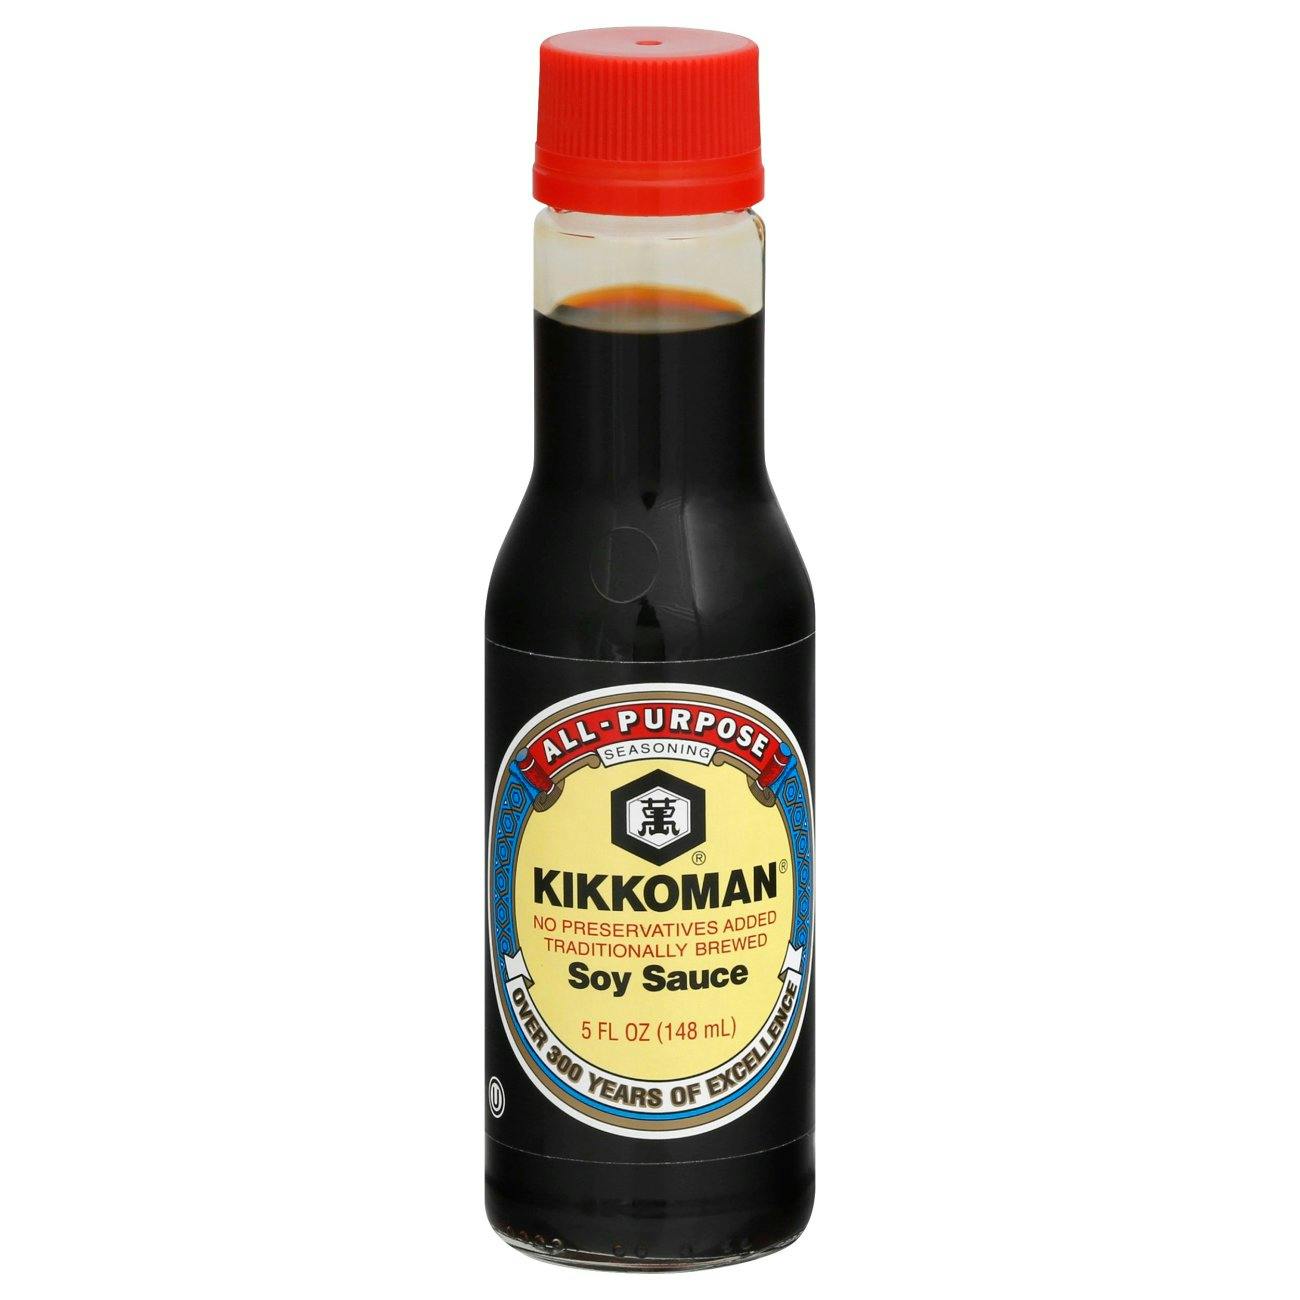 of soy sauce